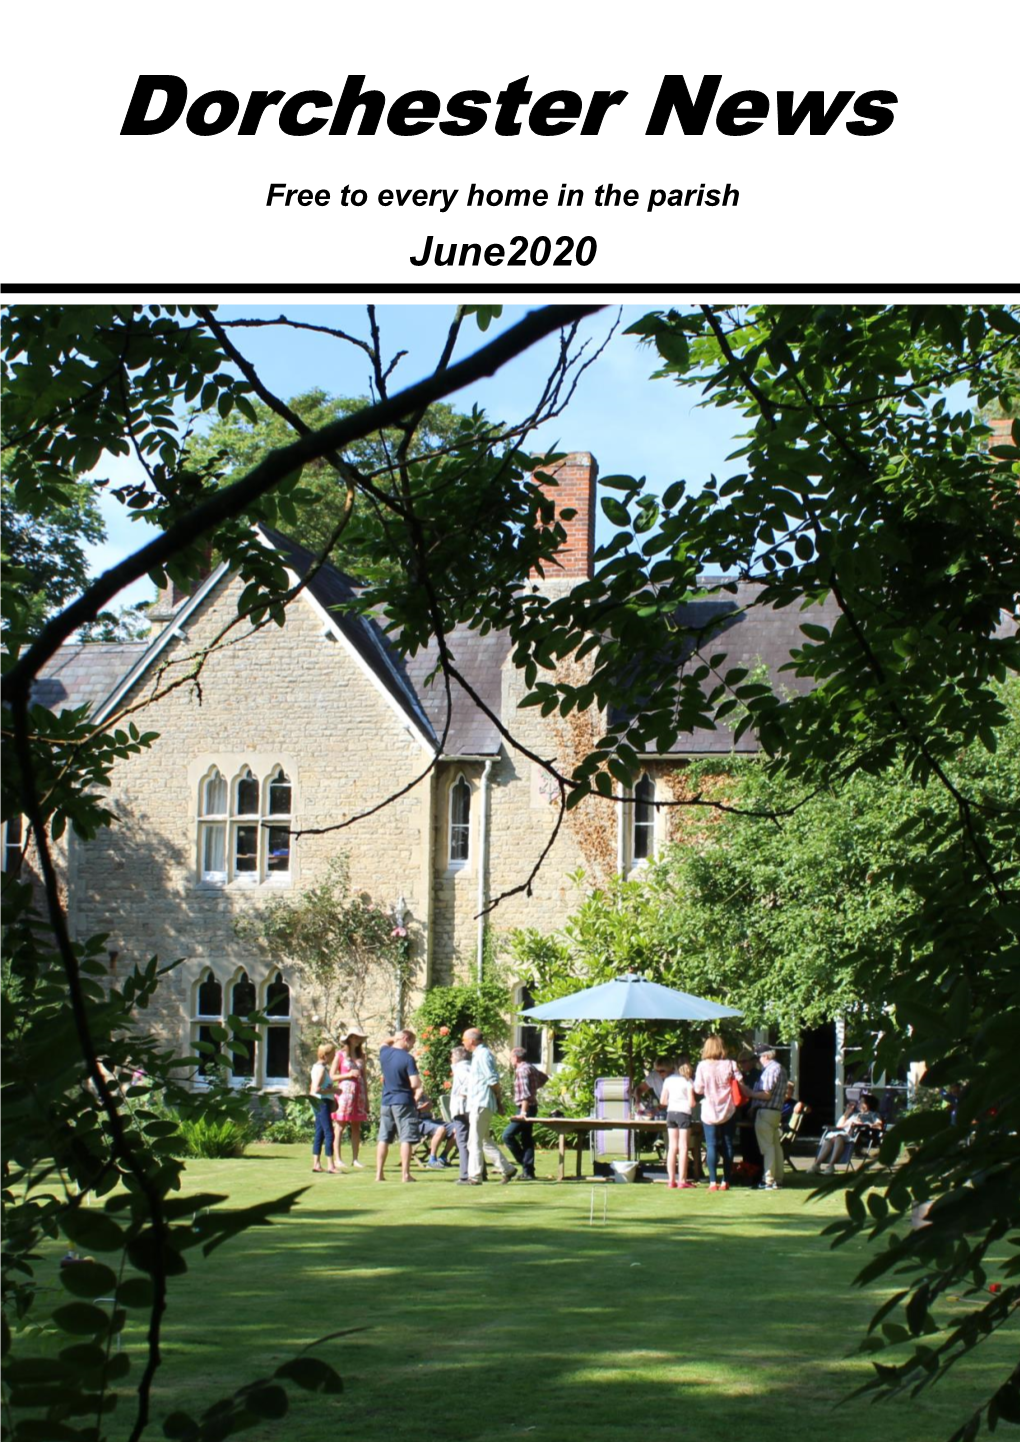 Dorchester News Free to Every Home in the Parish June2020